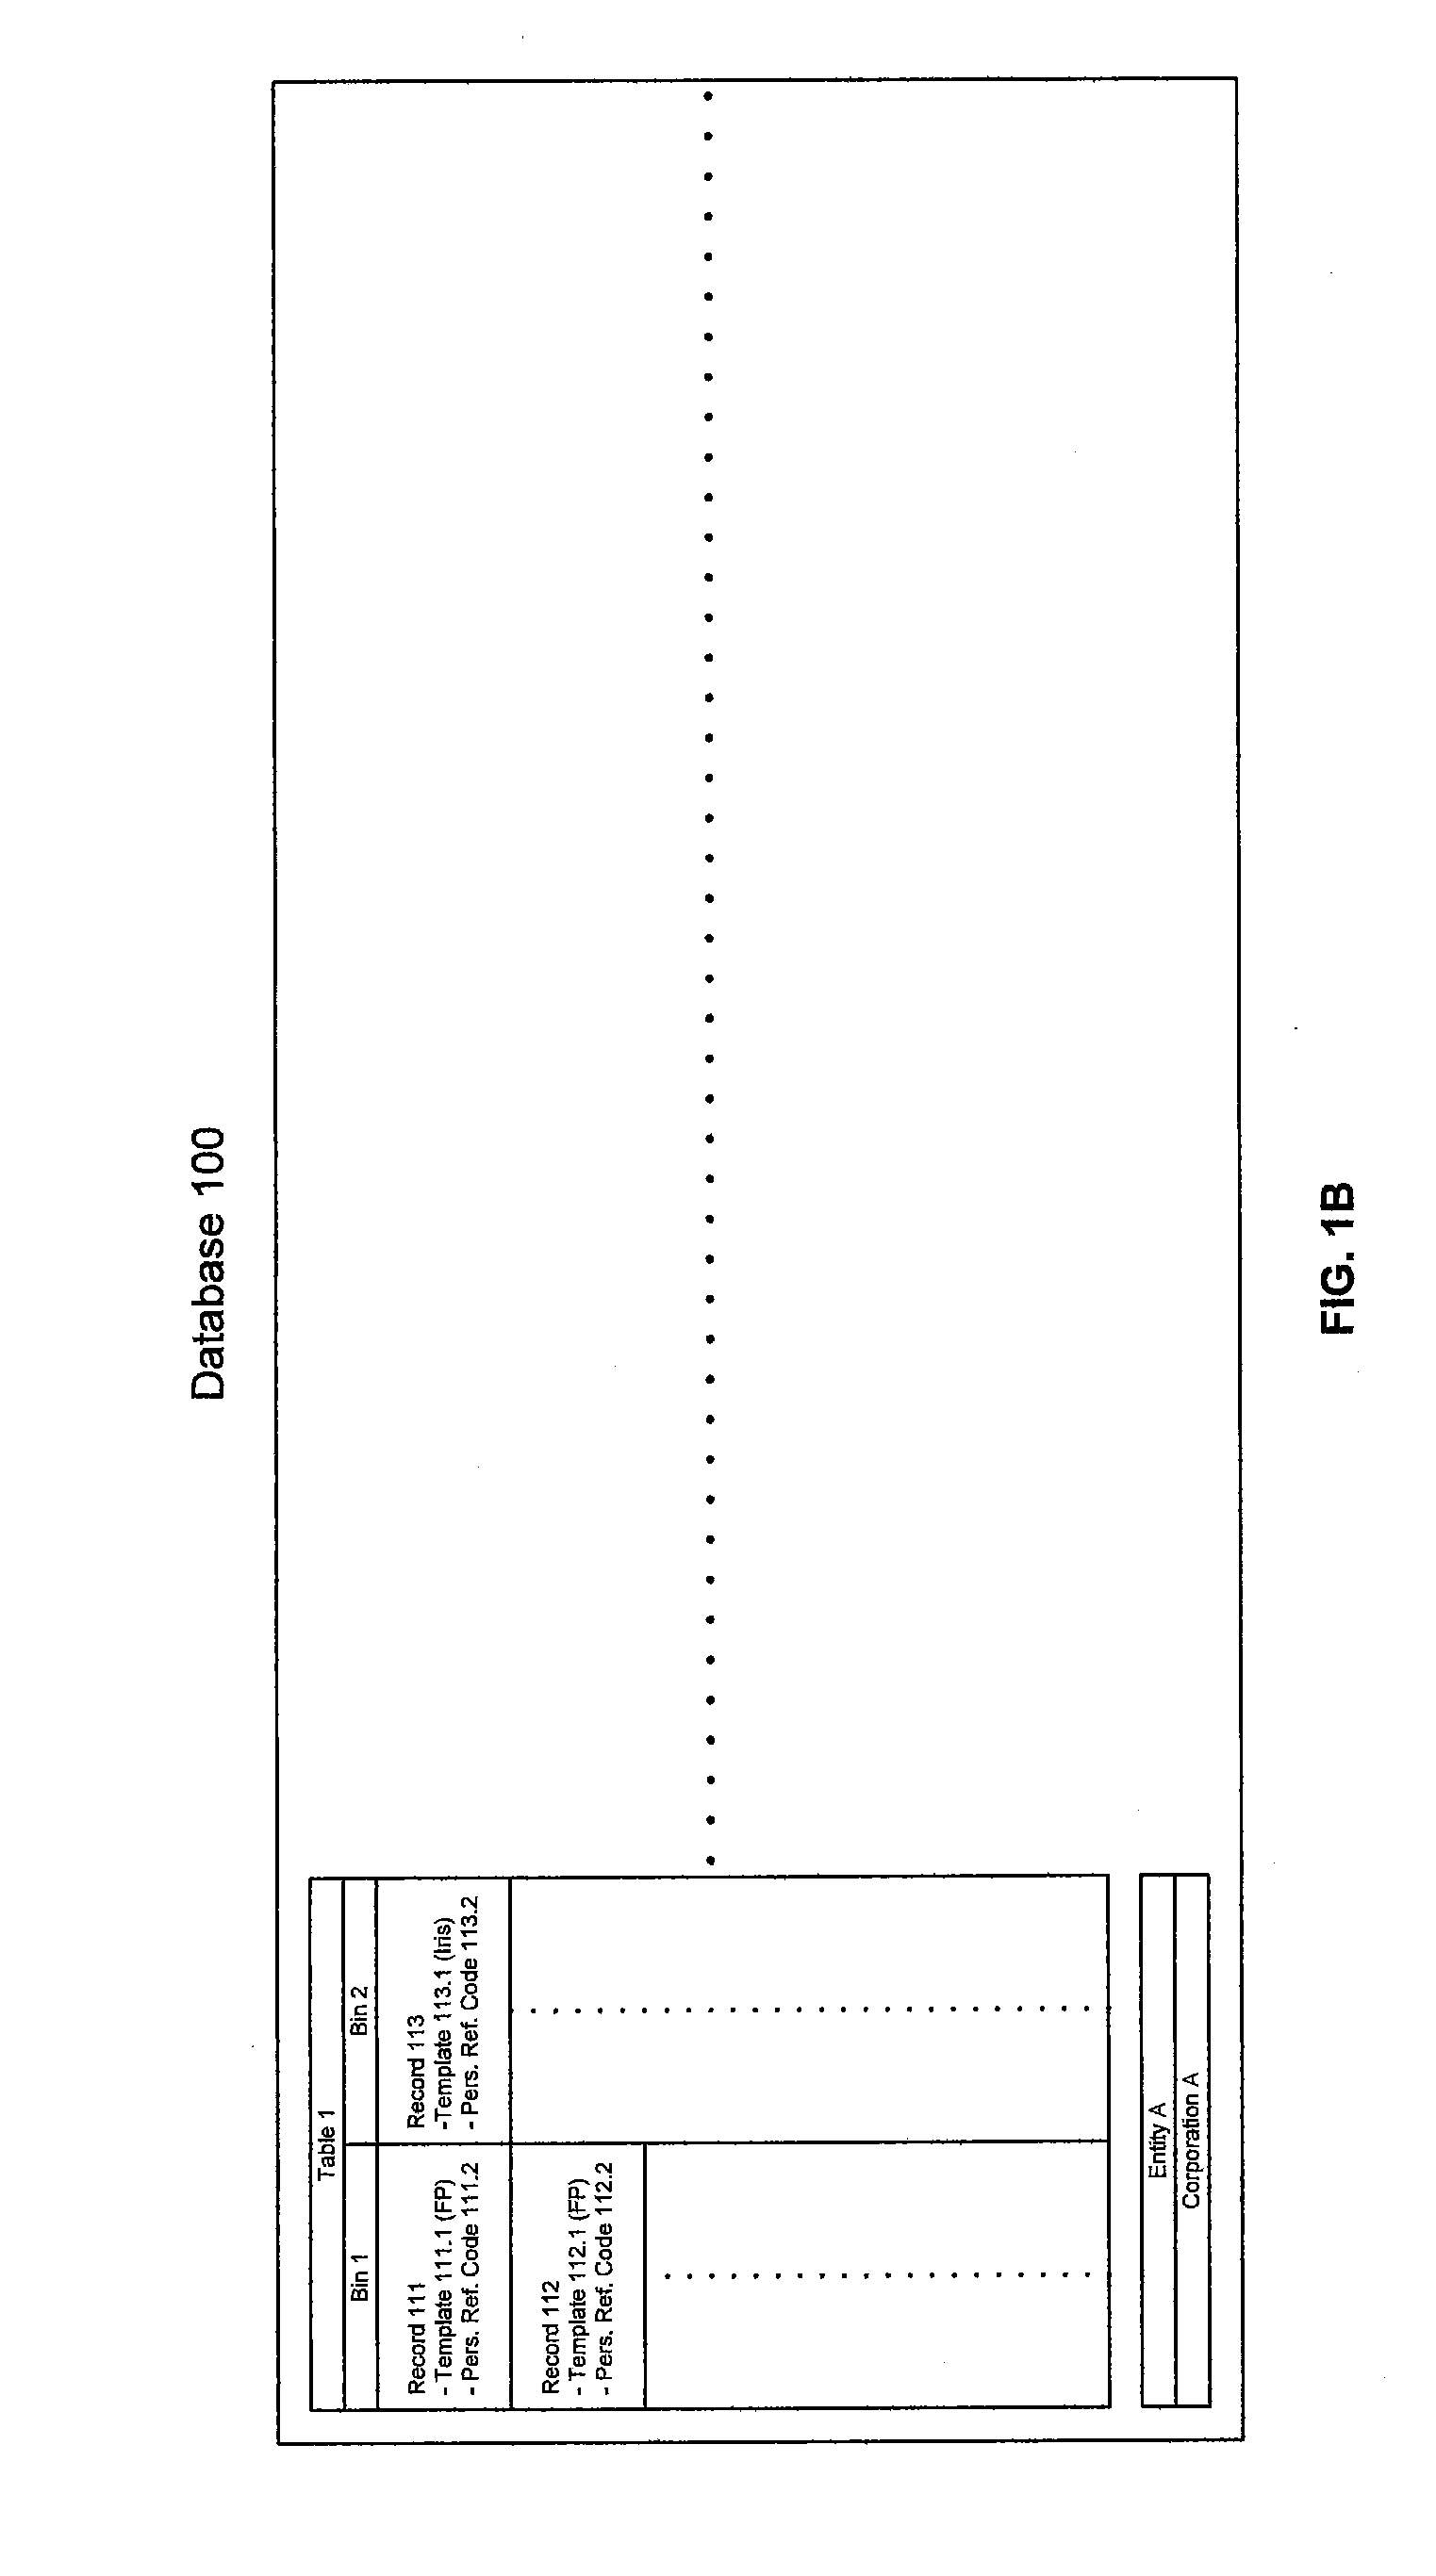 Method and system for authenticating and validating identities based on multi-modal biometric templates and special codes in a substantially anonymous process